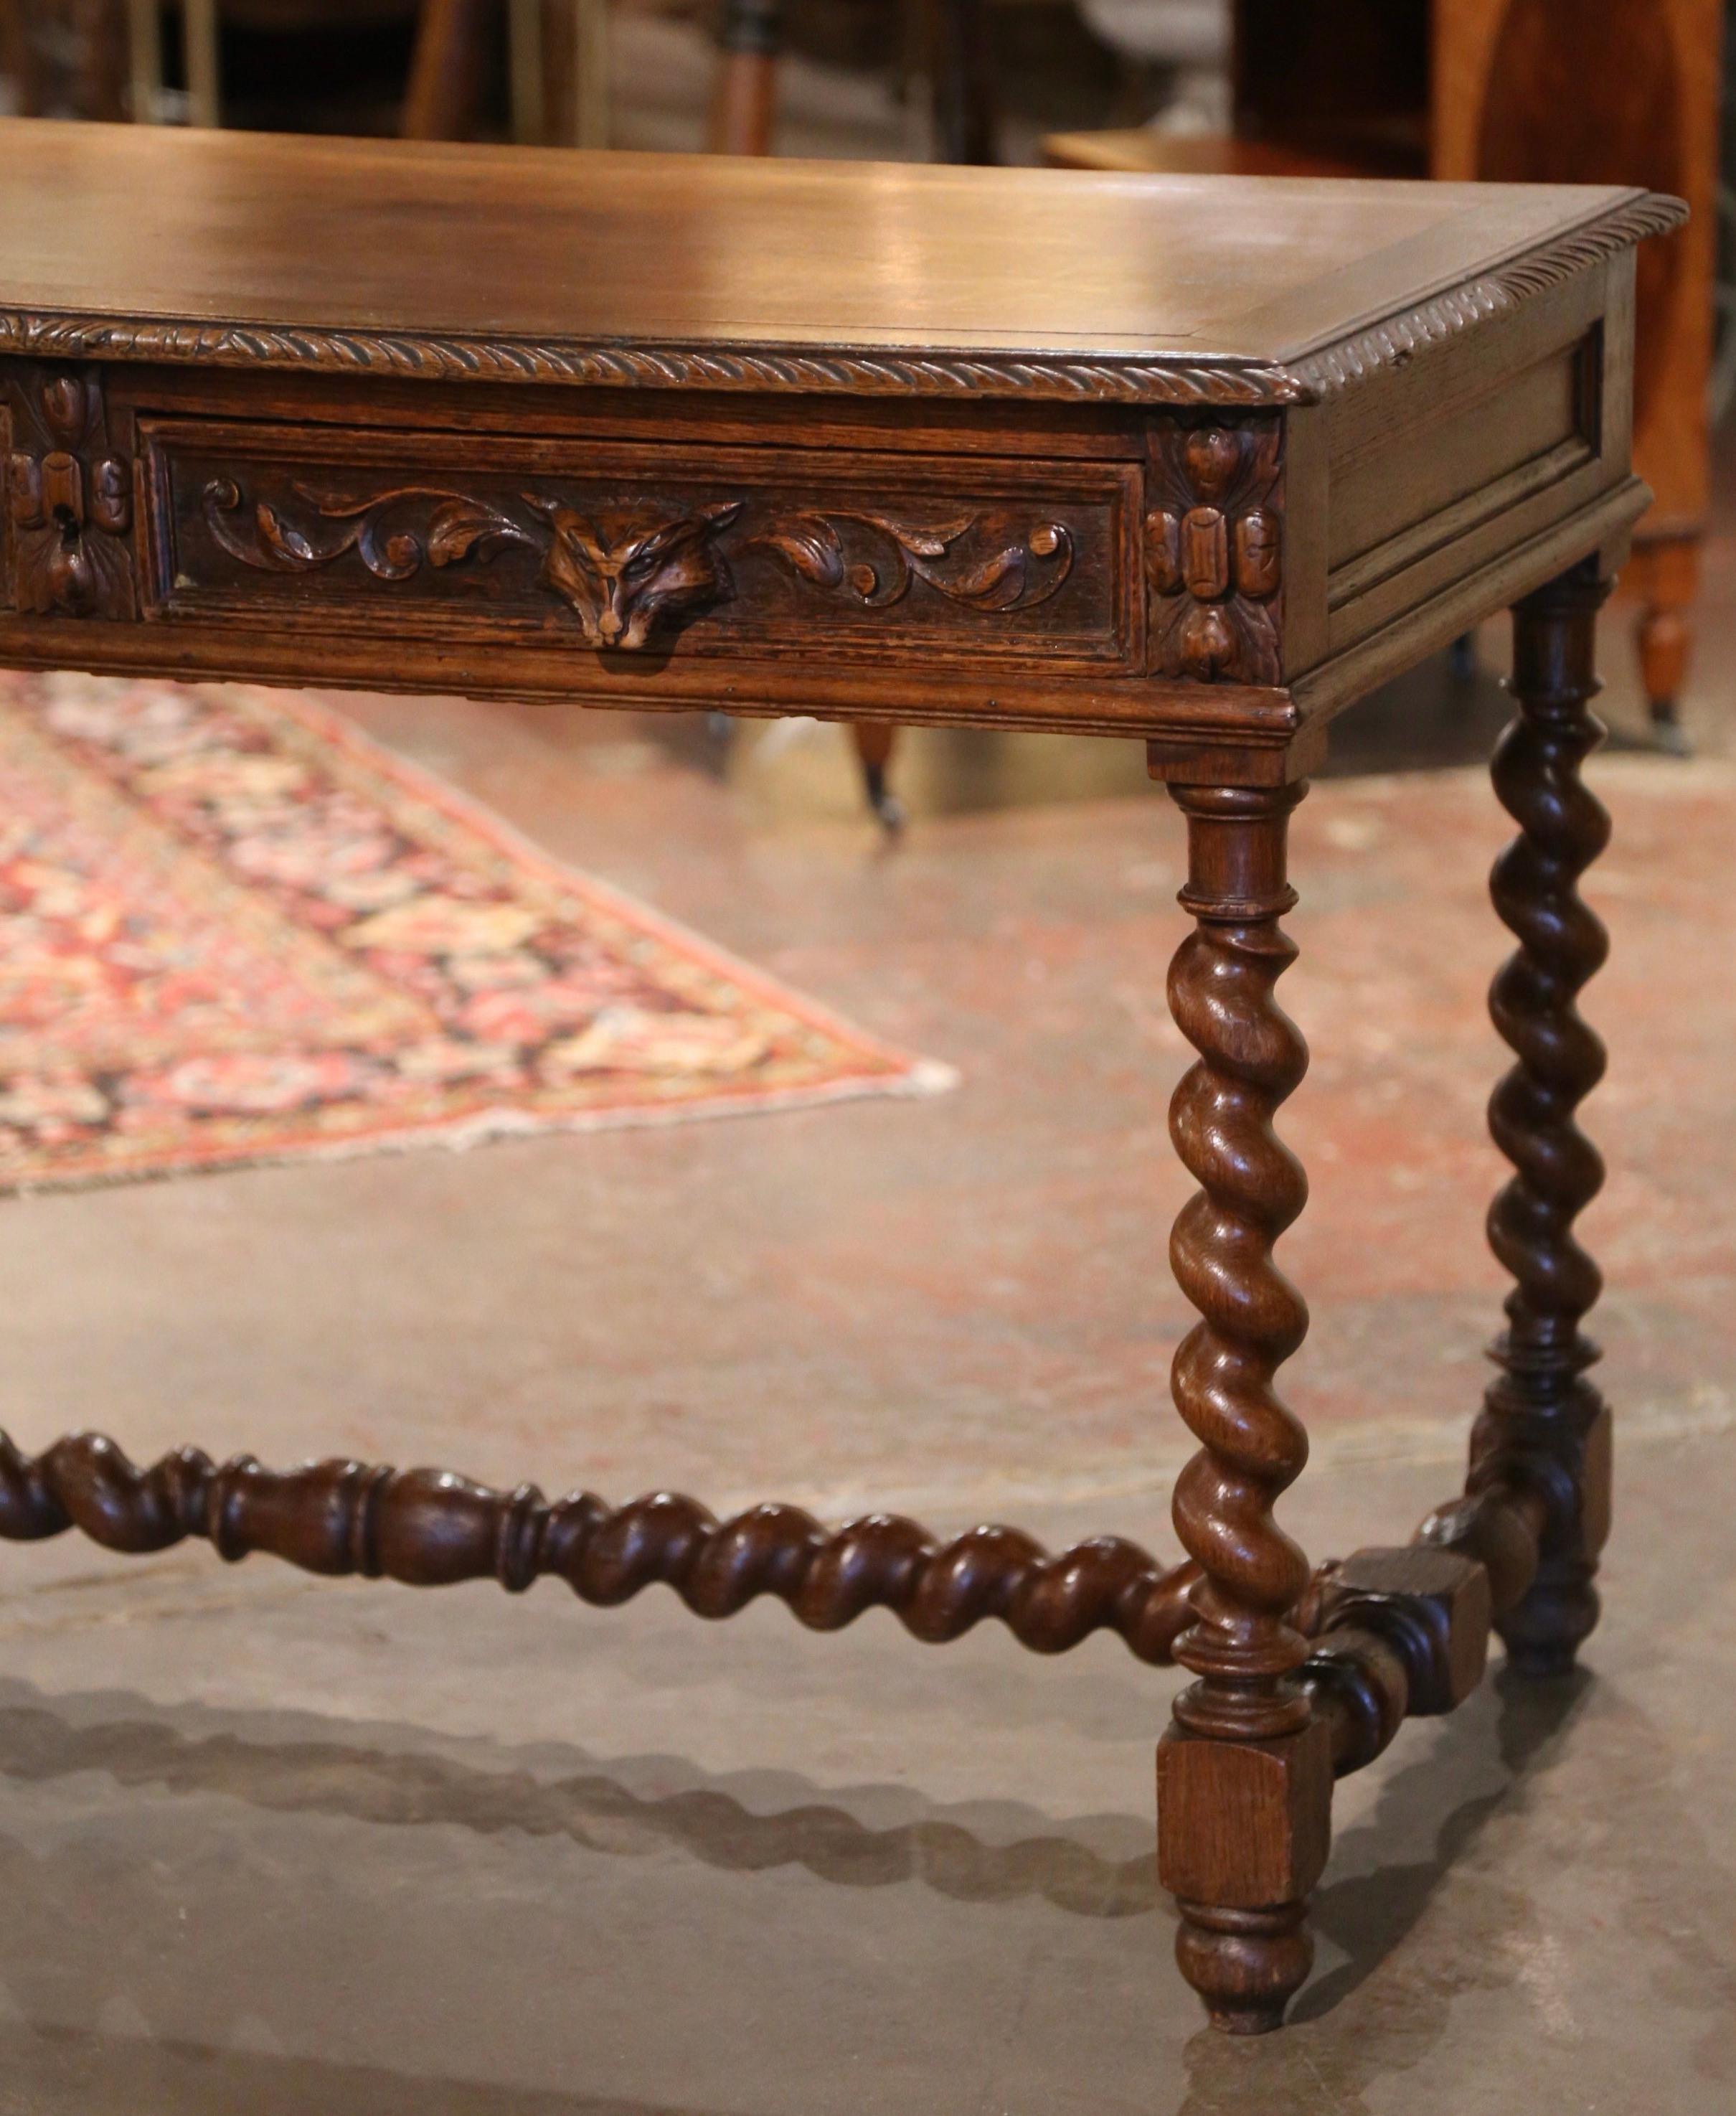 Hand-Carved 19th Century French Louis XIII Carved Oak Barley Twist Table Desk with Drawers